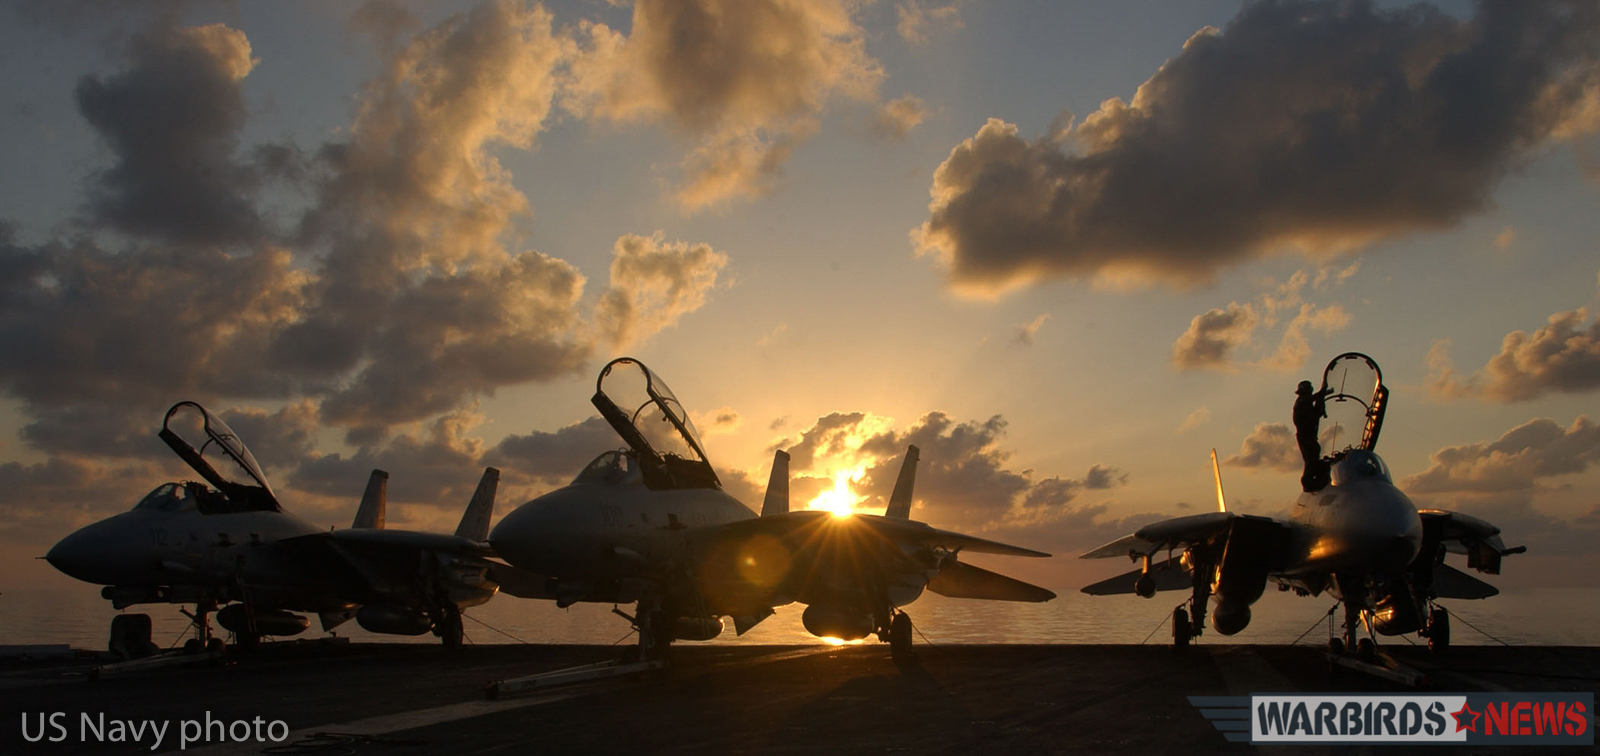 At sea aboard USS Theodore Roosevelt (CVN 71) Dec. 24, 2001-- A row of F-14 “Tomcats” assigned to the "Diamondbacks" of Fighter Squadron One Zero Two (VF 102) await their next mission. Theodore Roosevelt and her embarked Carrier Air Wing One (CVW-1) are conducting missions in support of Operation Enduring Freedom. U.S. Navy Photo by Photographer’s Mate Airman Carly Joy Cranston (Released)